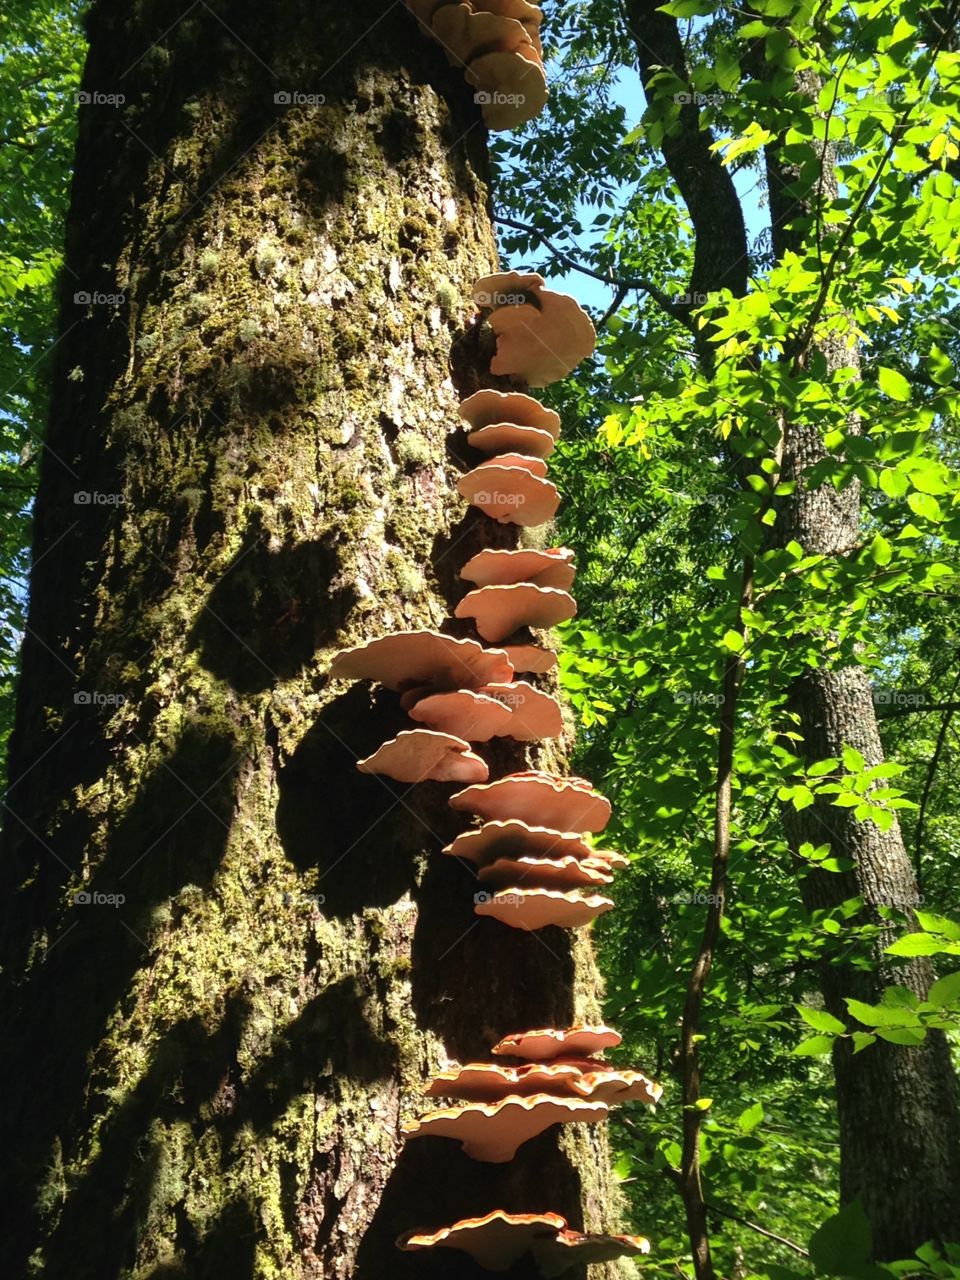 Column of shelf fungus in Smoky Mountains National Park